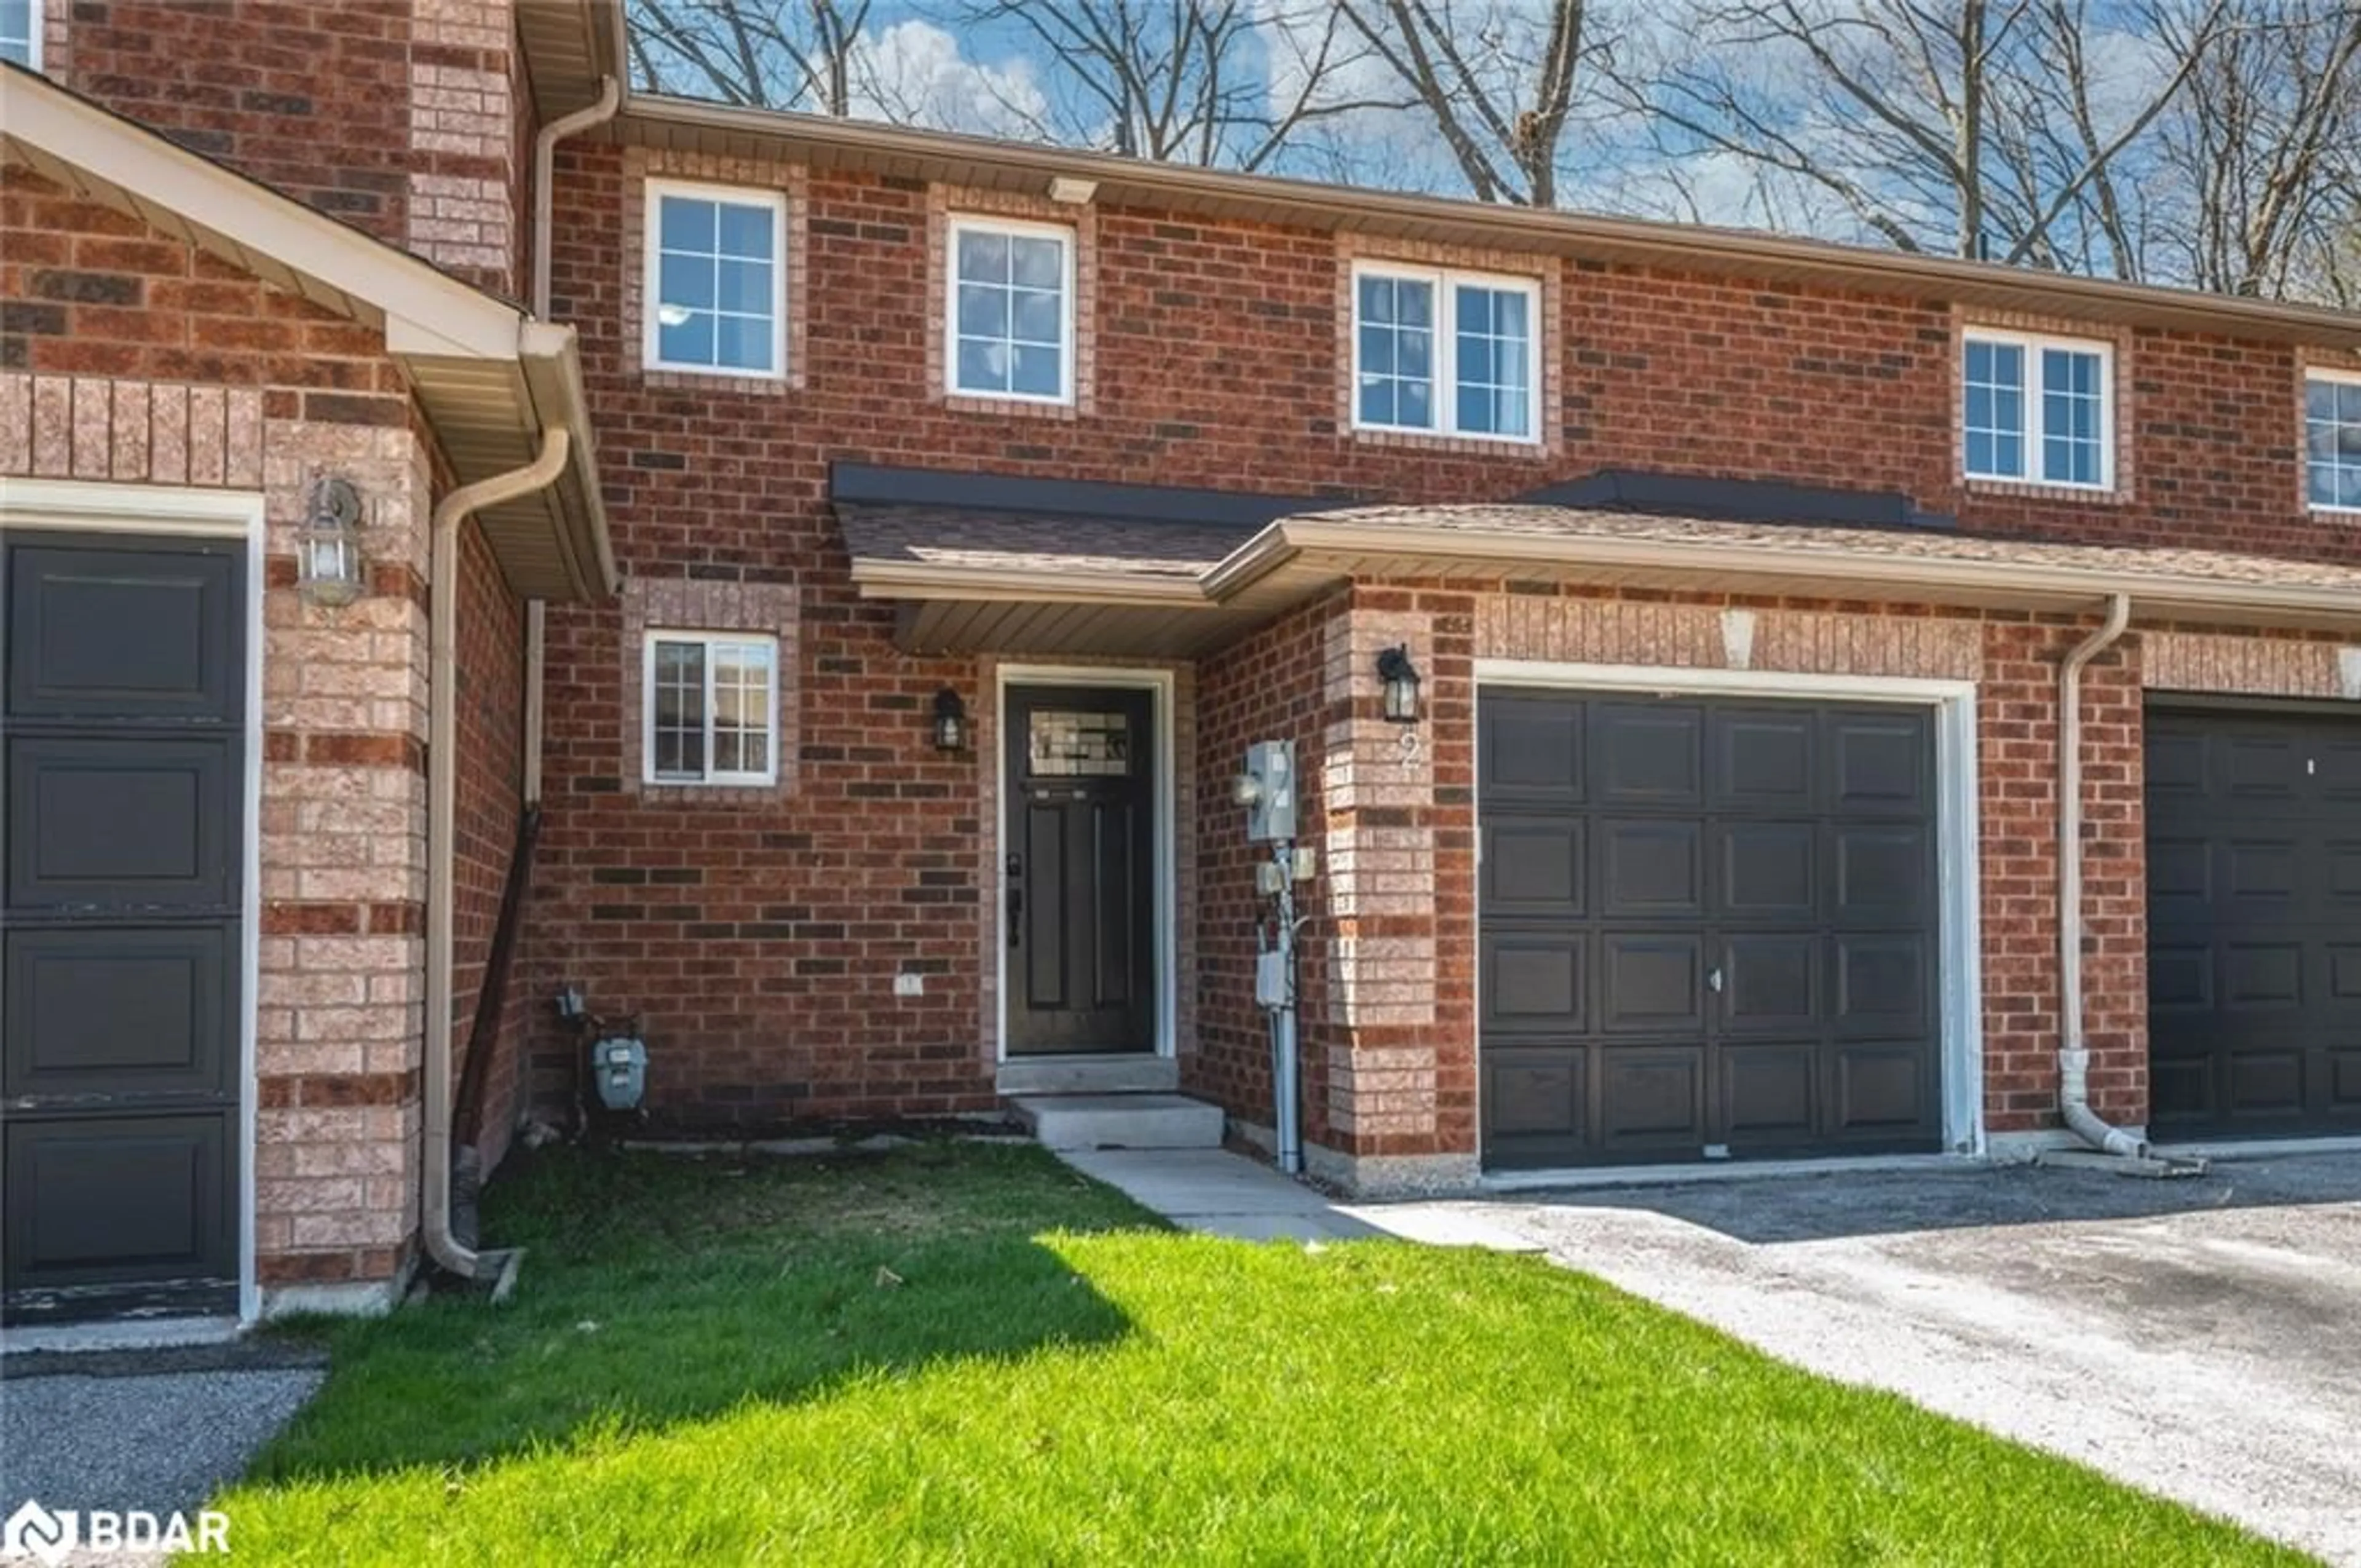 Home with brick exterior material for 38 Kenwell Cres #2, Barrie Ontario L4N 0Z6